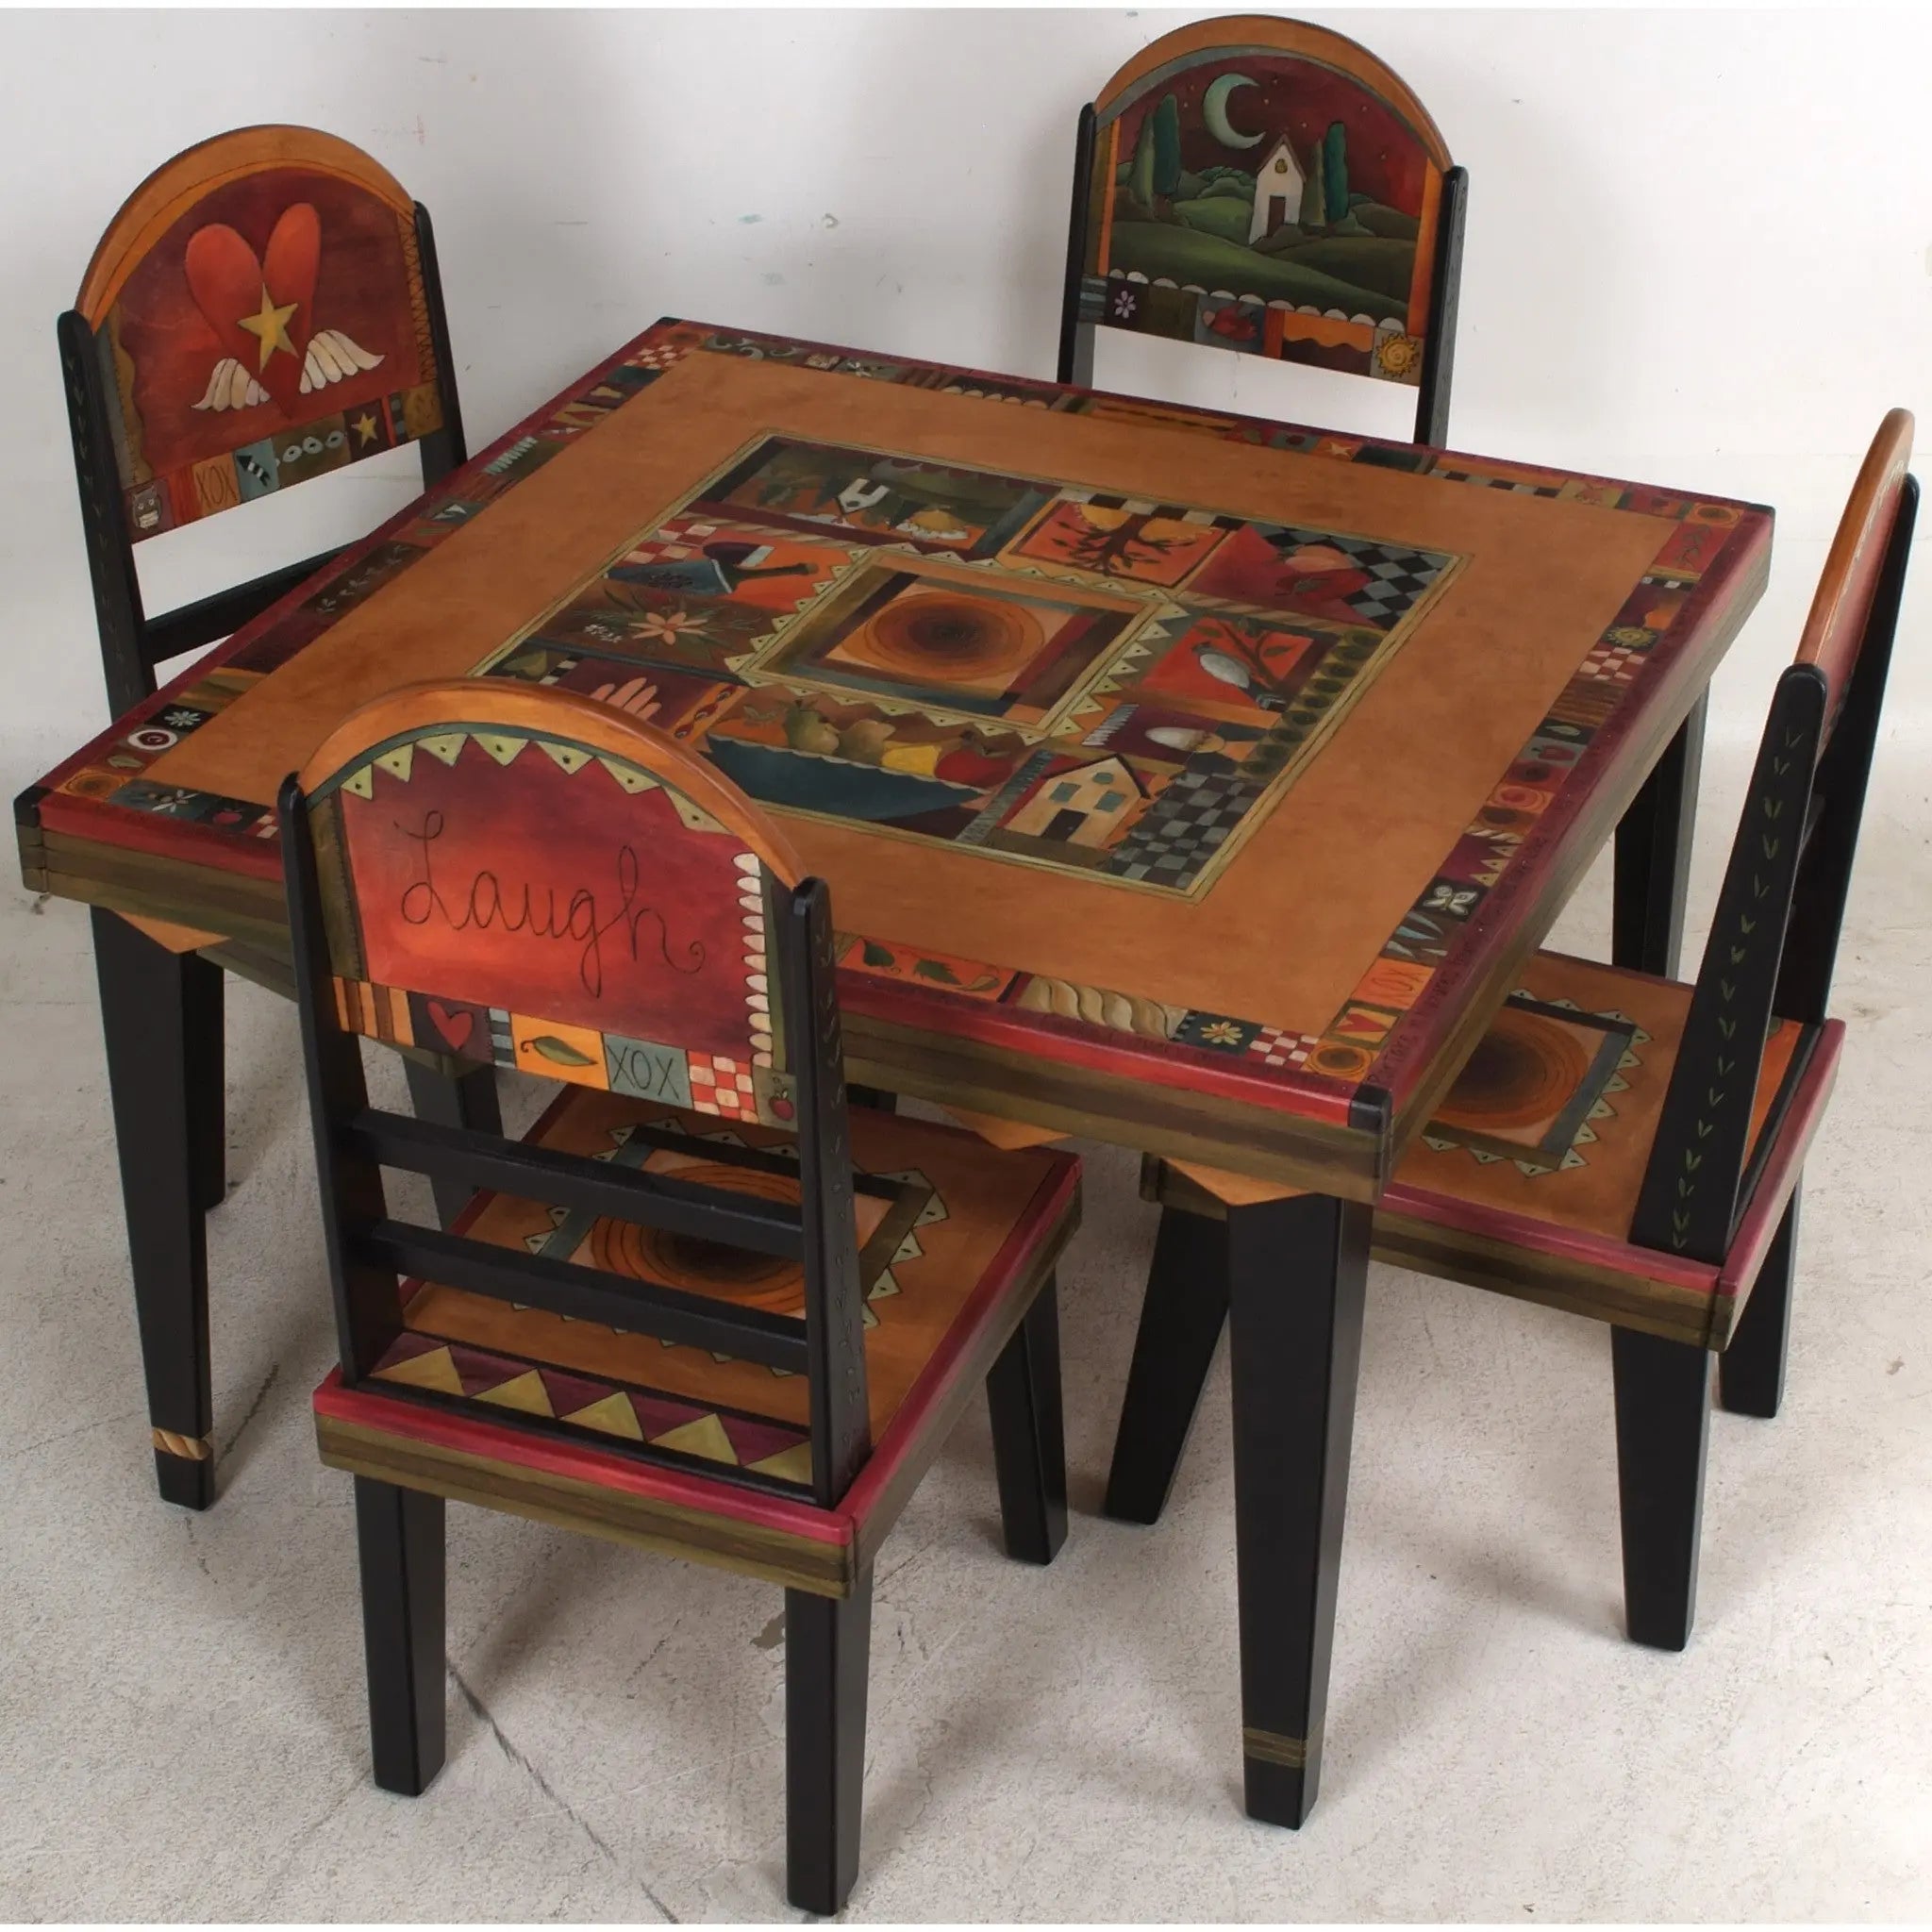 square dining room tables